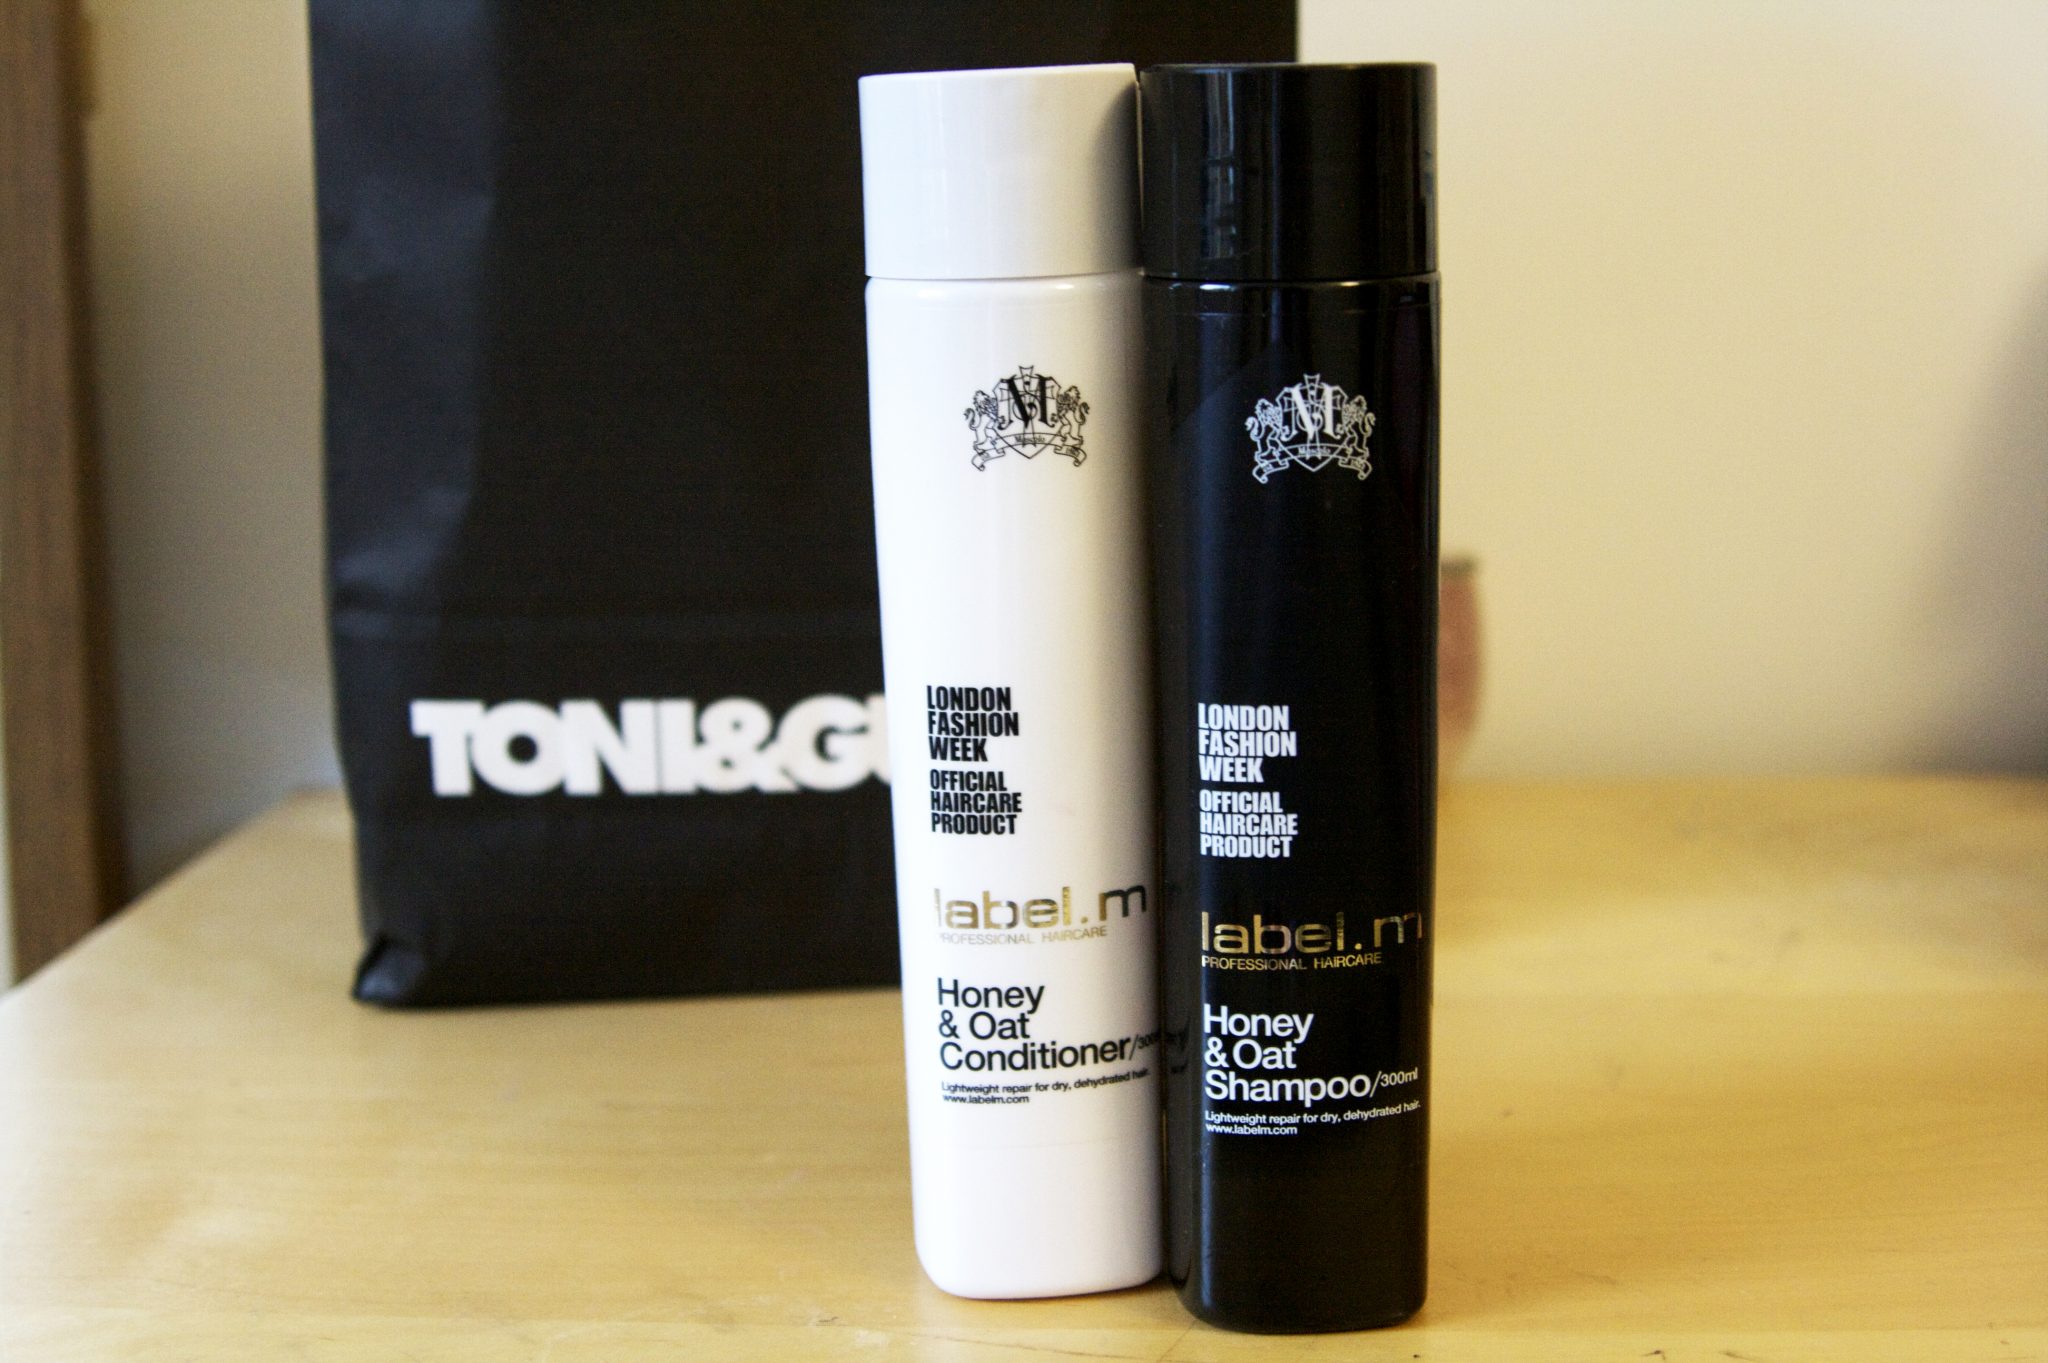 Toni and Guy Label M hair styling and hair care products. Official hair care for London Fashion Week. Volume Foam, honey and oat shampoo conditioner, hair perfume, texturising volume spray. Manchester fashion and lifestyle blog.